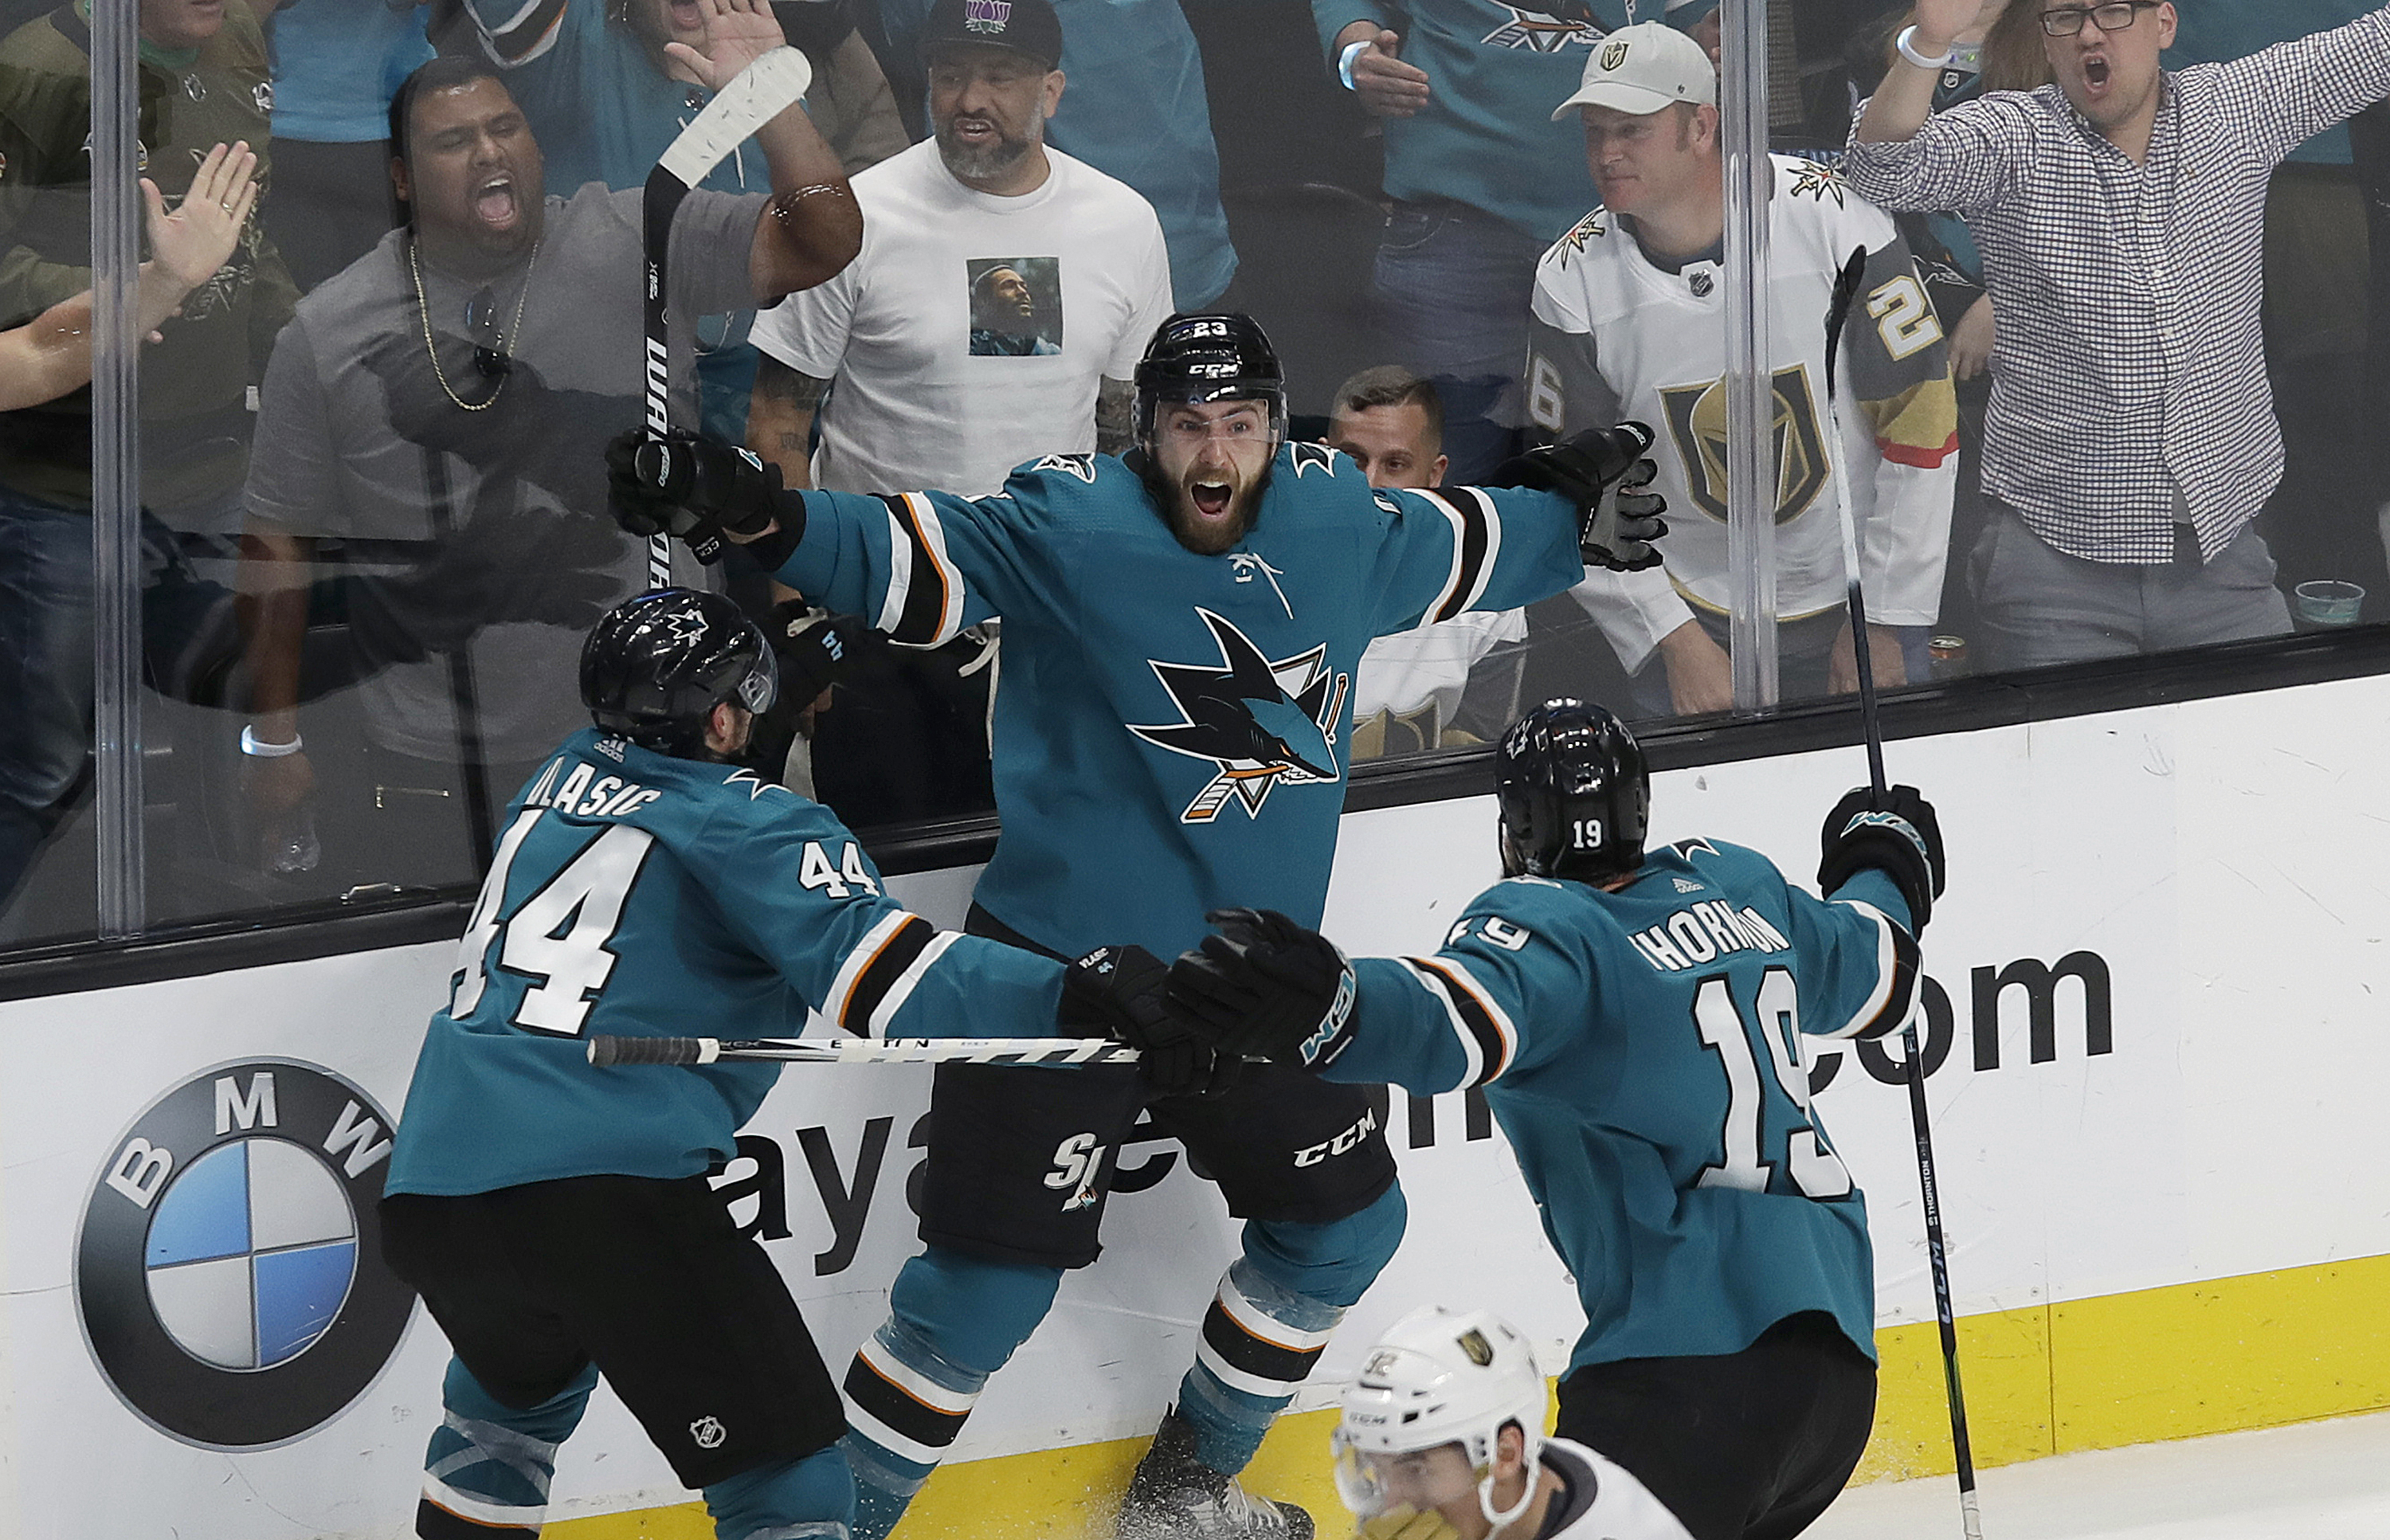 Banged-up Sharks prepare for 2nd-round series vs. rested Avs